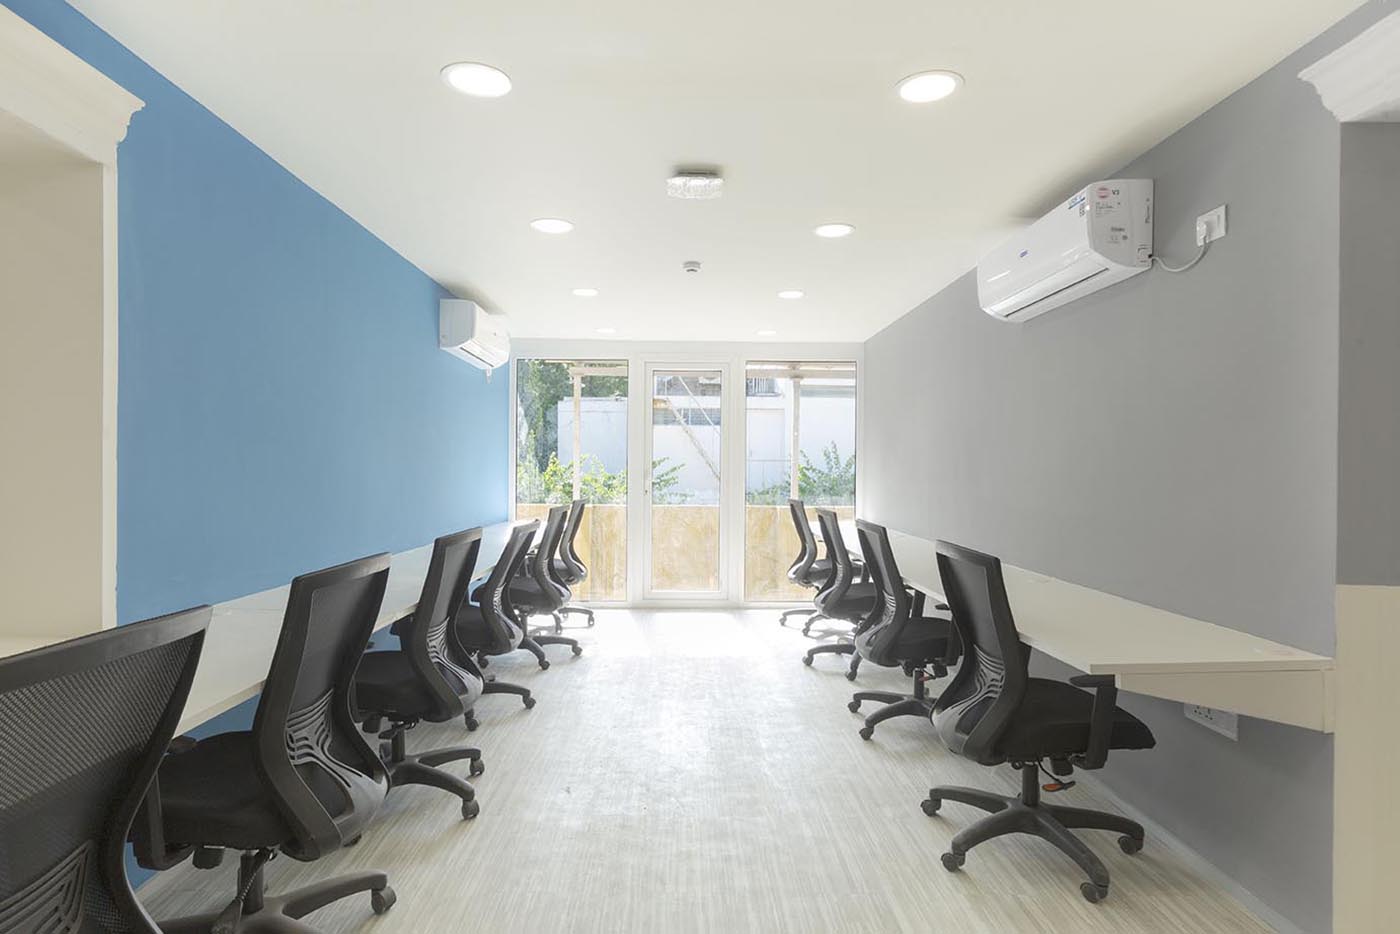 Amenities of Cove Offices’ shared office spaces for rent